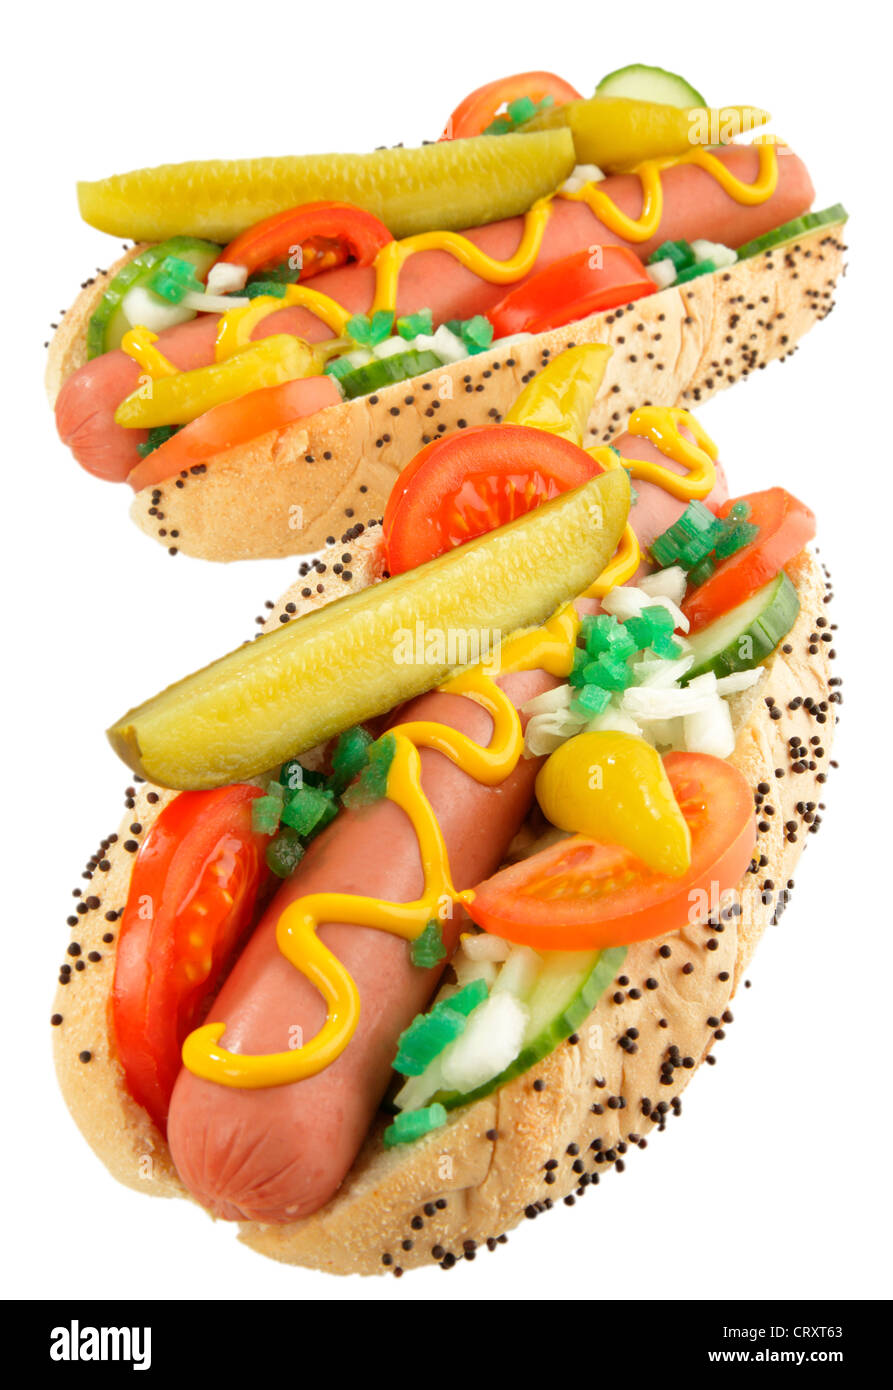 CHICAGO STYLE HOT DOGS Stock Photo